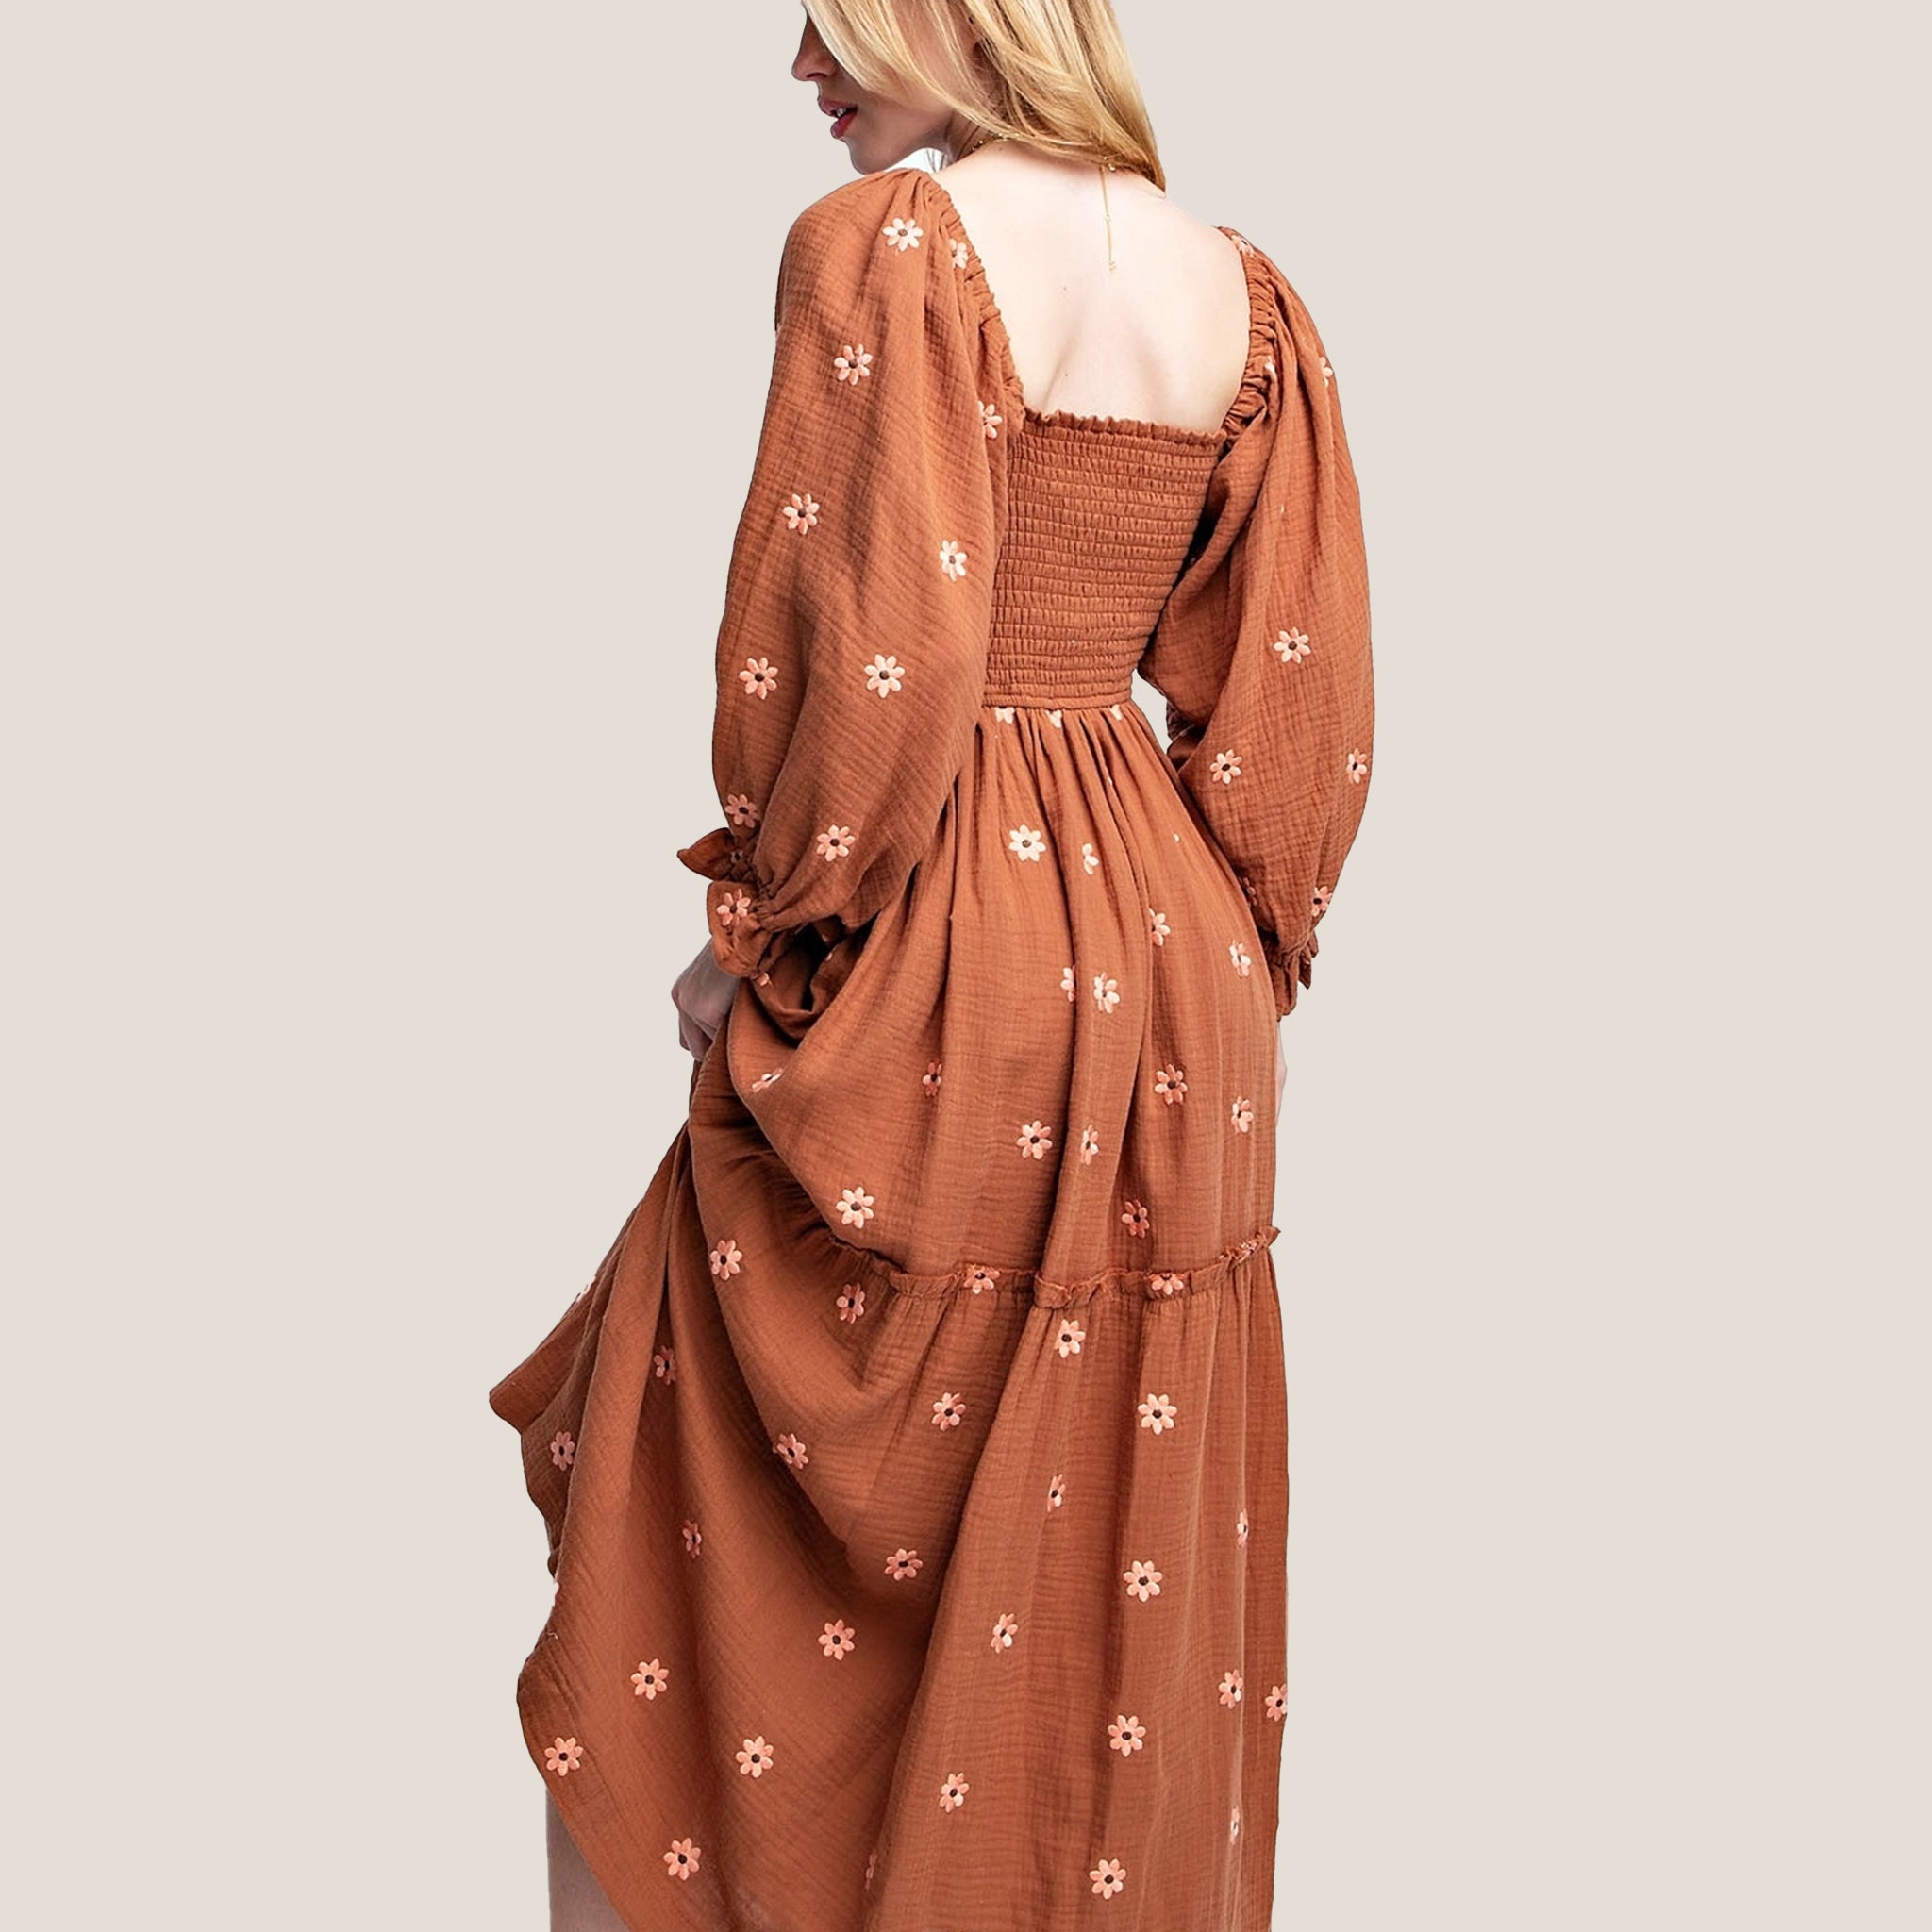 A rust / brown long-sleeve dress with flower embroidery.